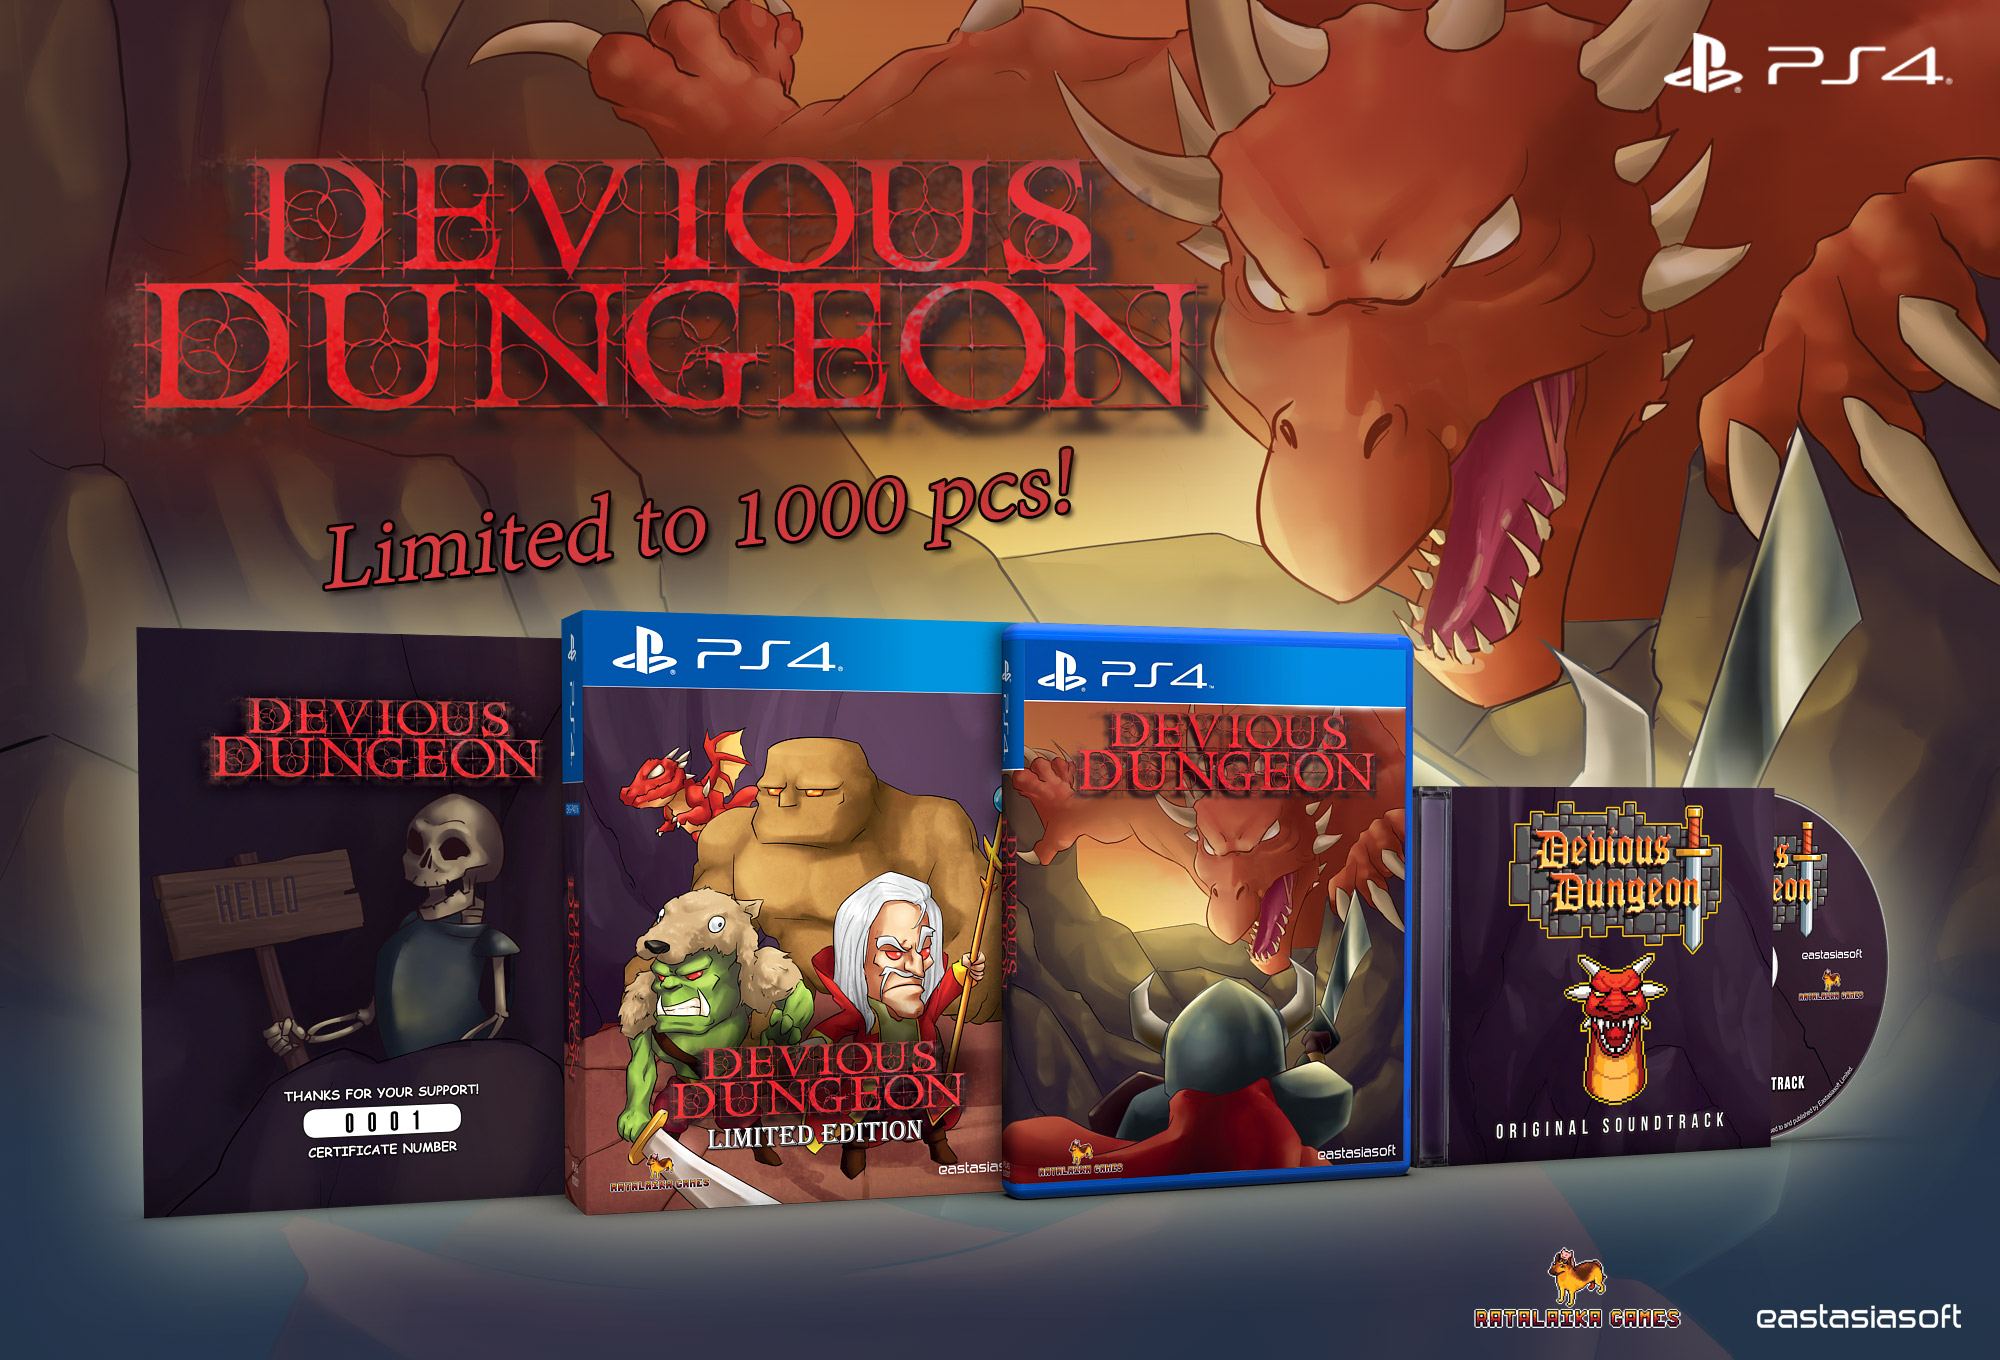 Devious Dungeon - PS4 - Play-Asia Devious-dungeon-limited-edition-569245.7